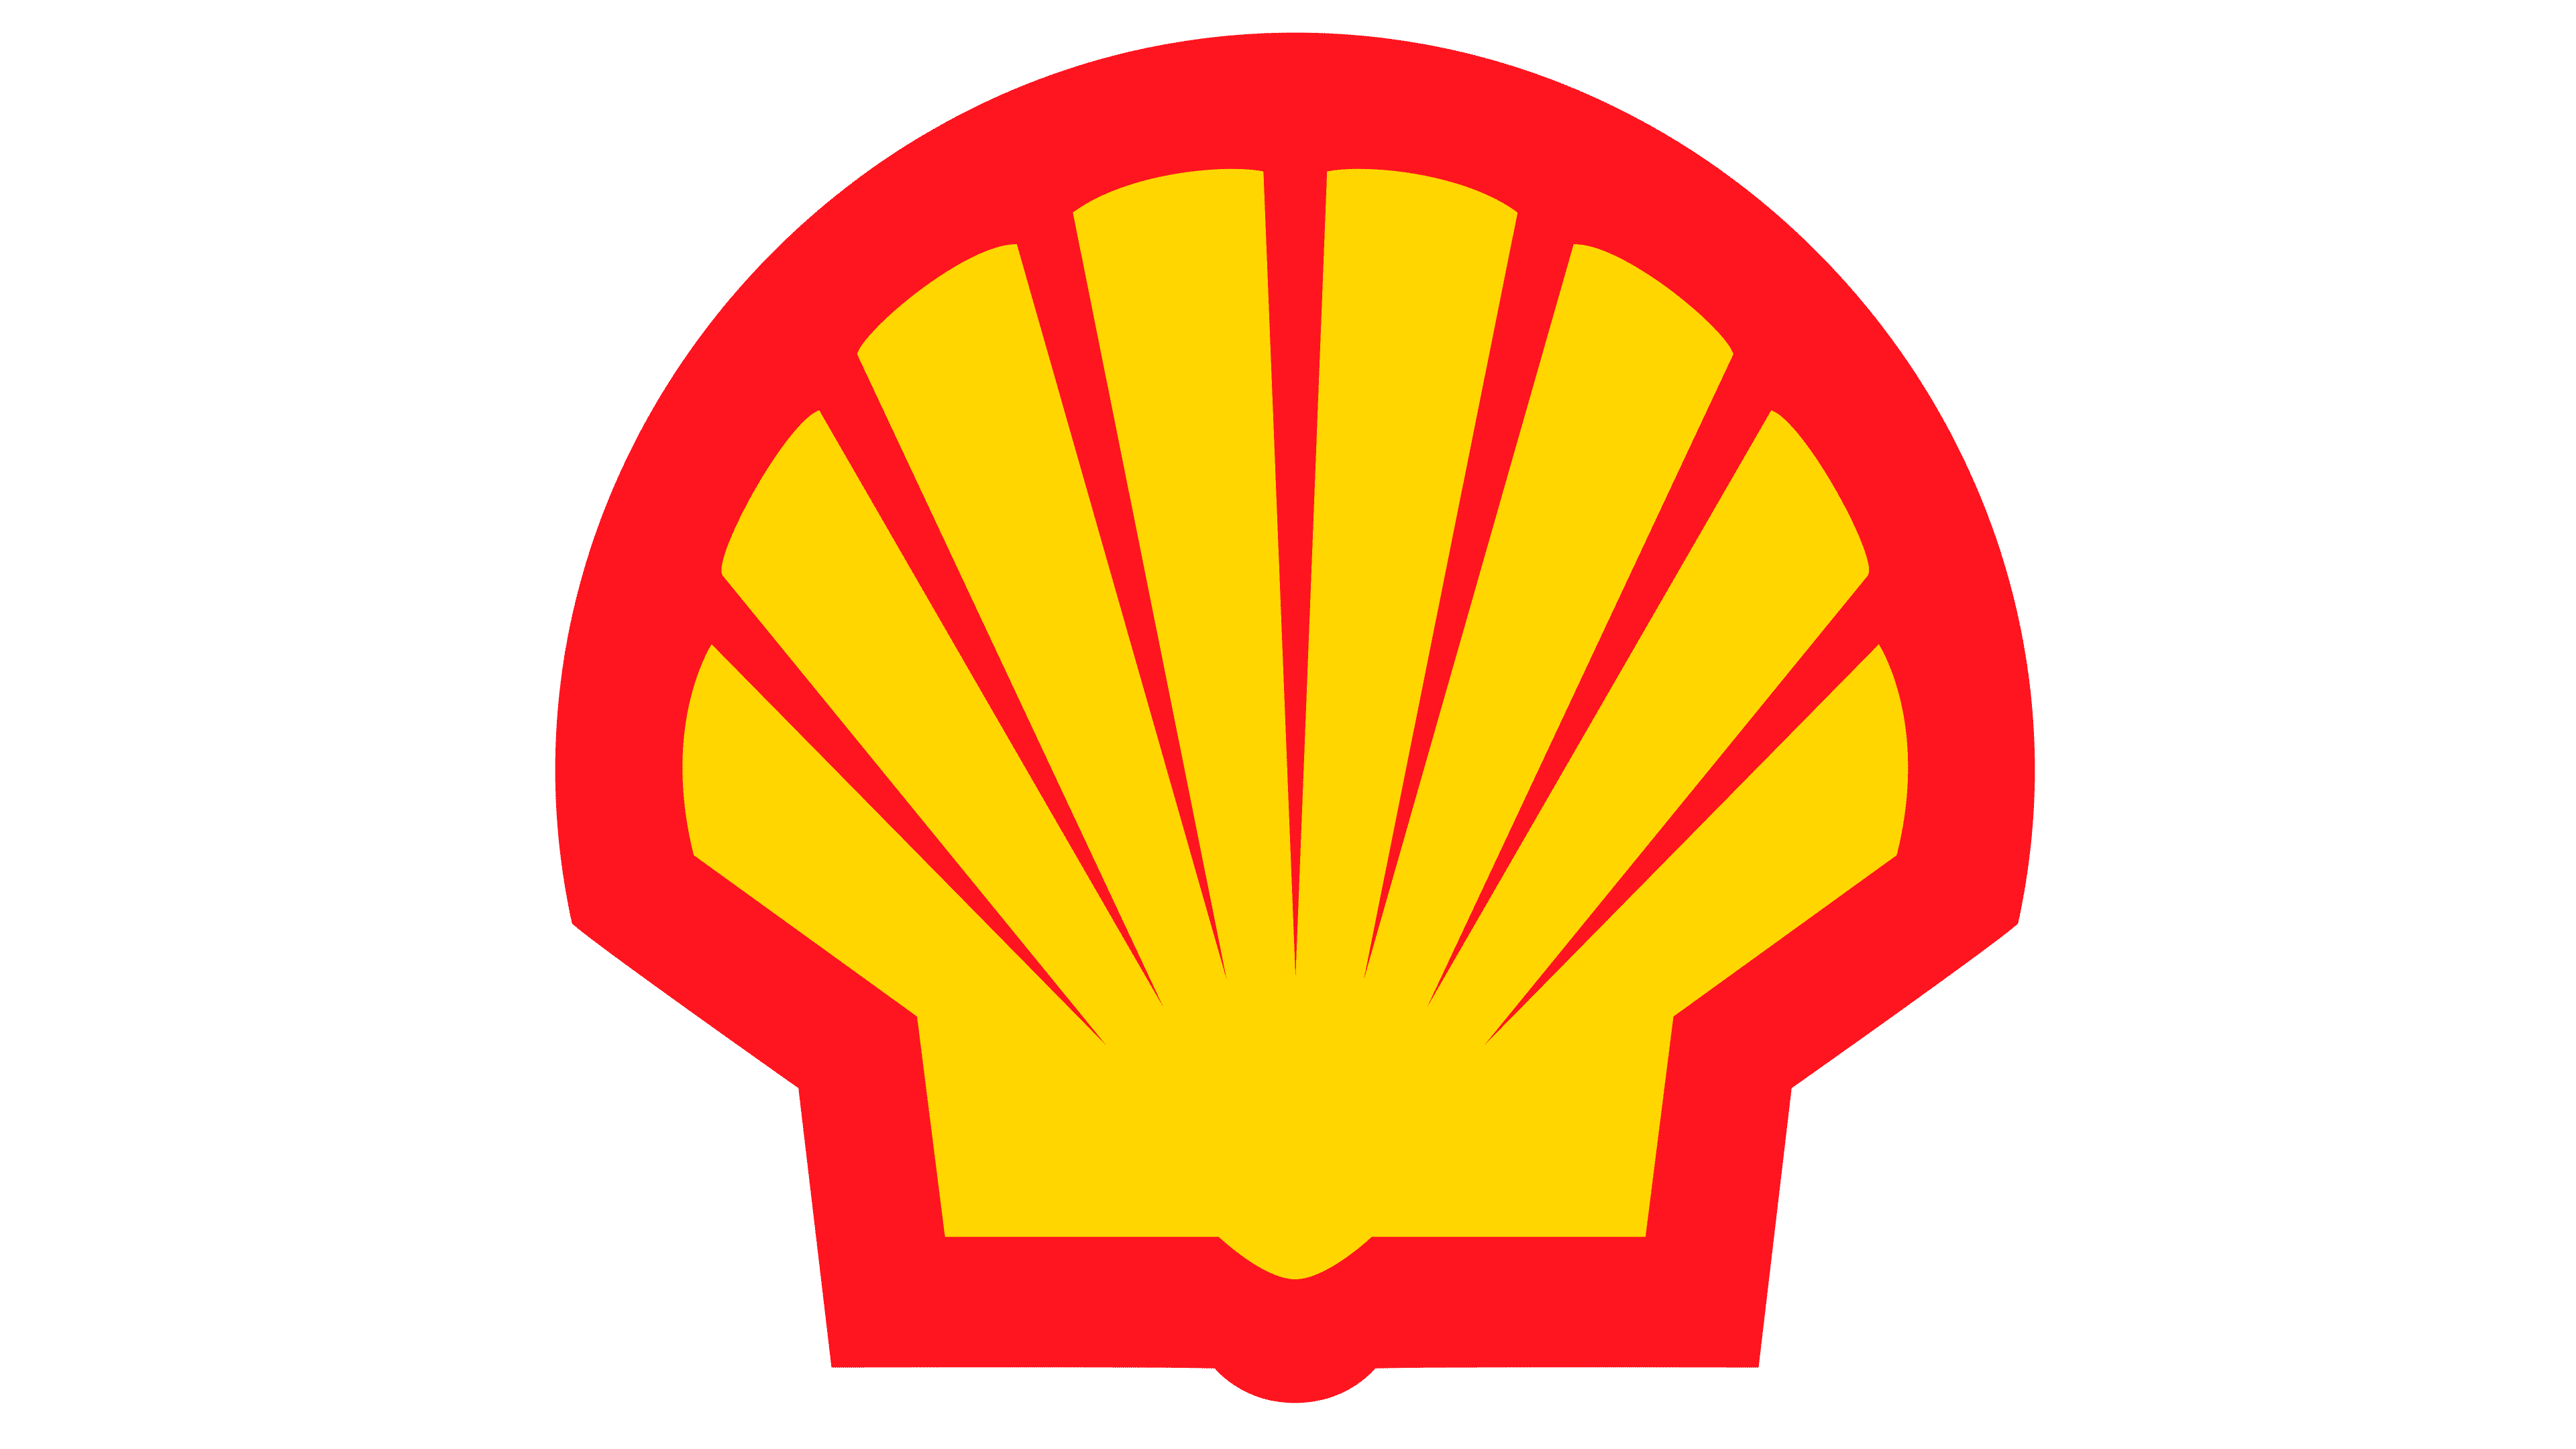 Oil & Gas - SHELL